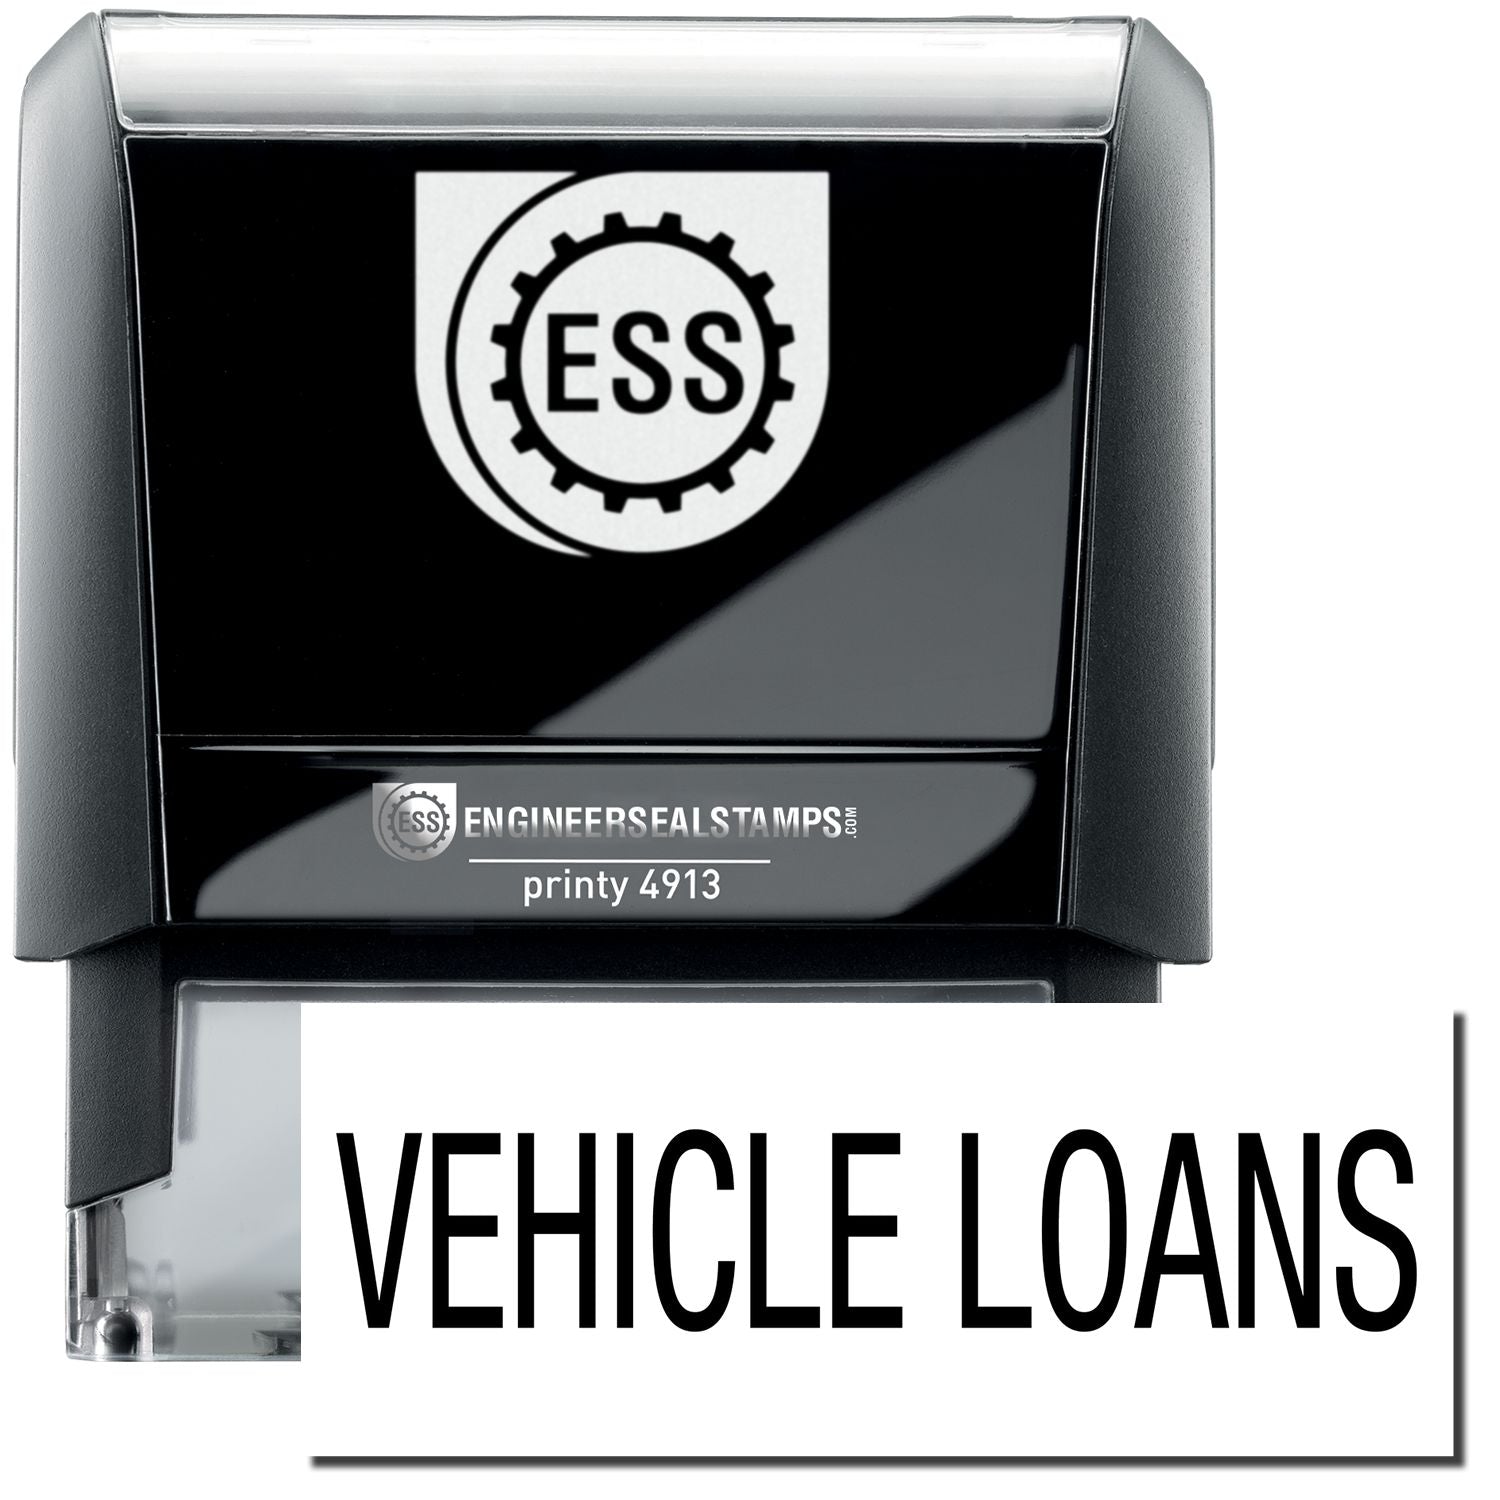 A self-inking stamp with a stamped image showing how the text "VEHICLE LOANS" in a large bold font is displayed by it.